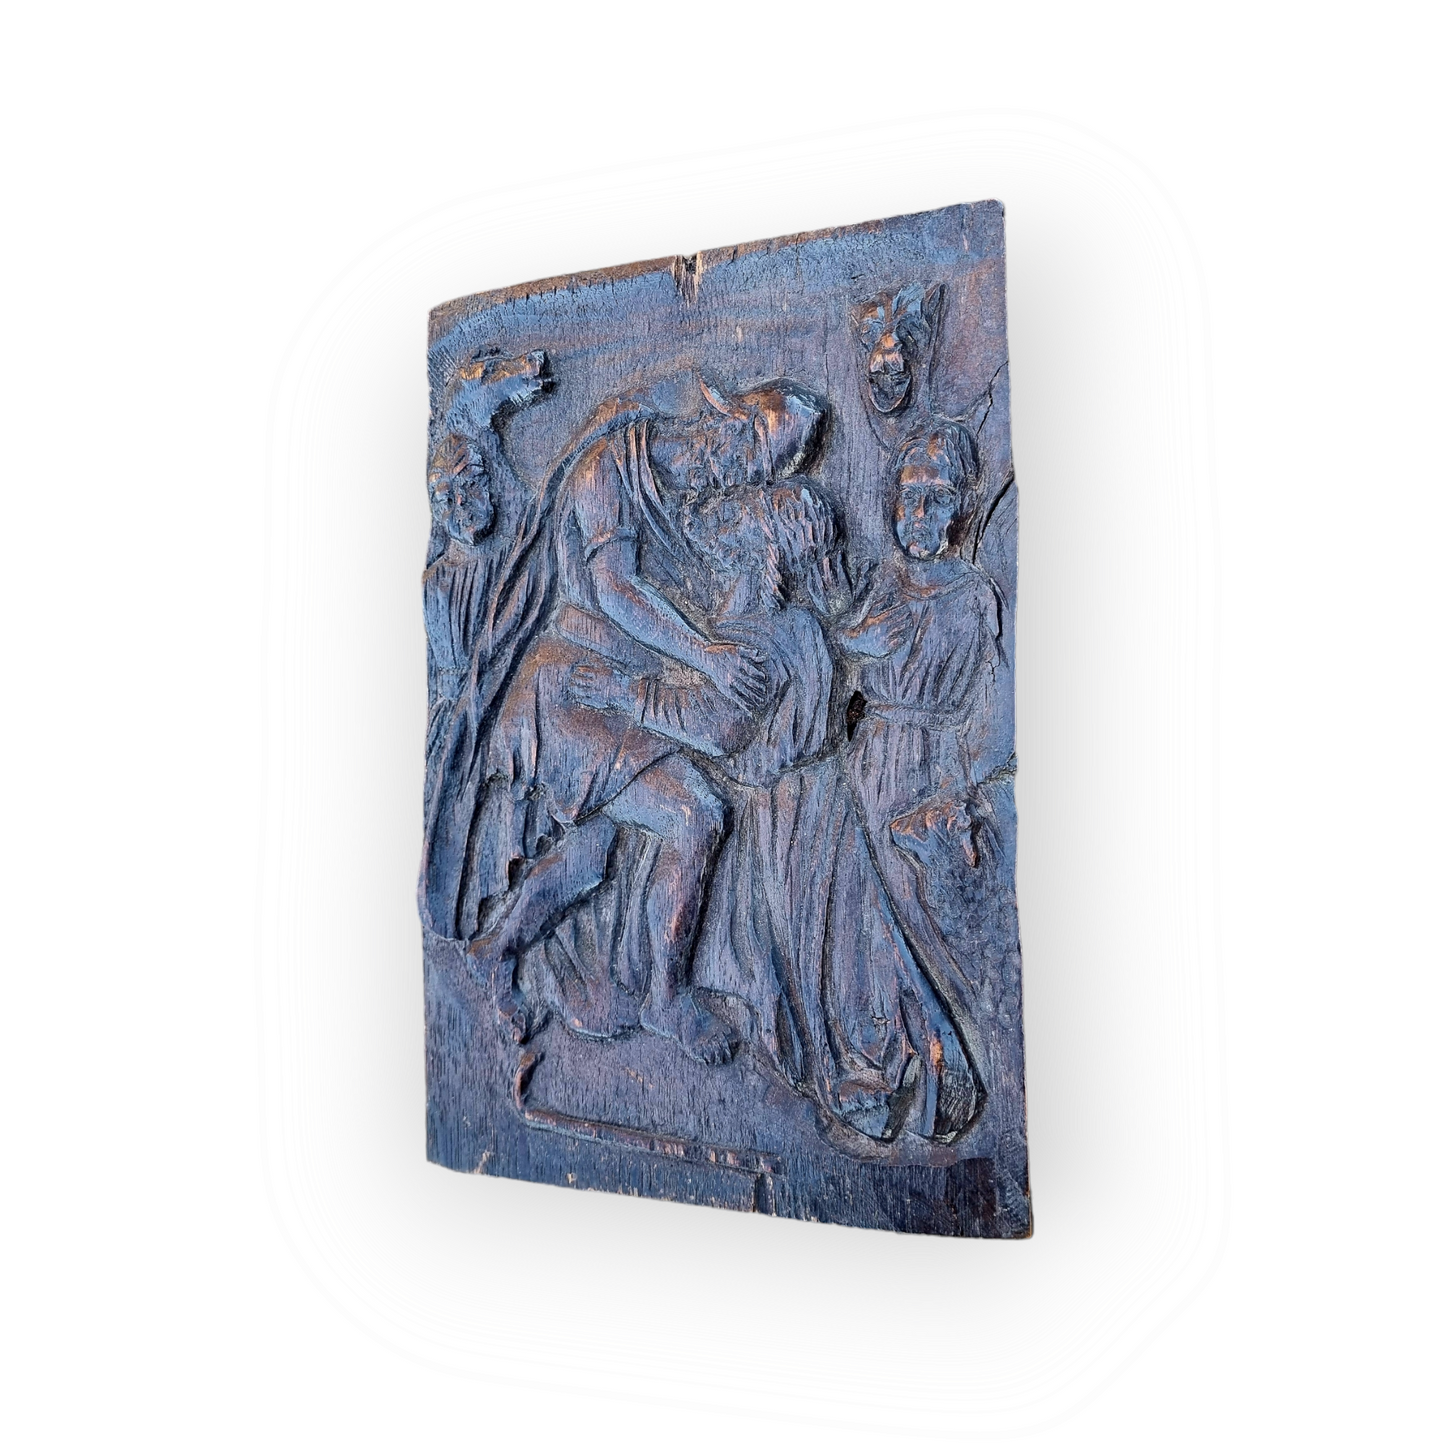 17th Century Flemish Antique Carved Oak Panel, Most Probably Depicting the Betrayal of Jesus in the Garden of Gethsemane by Judas